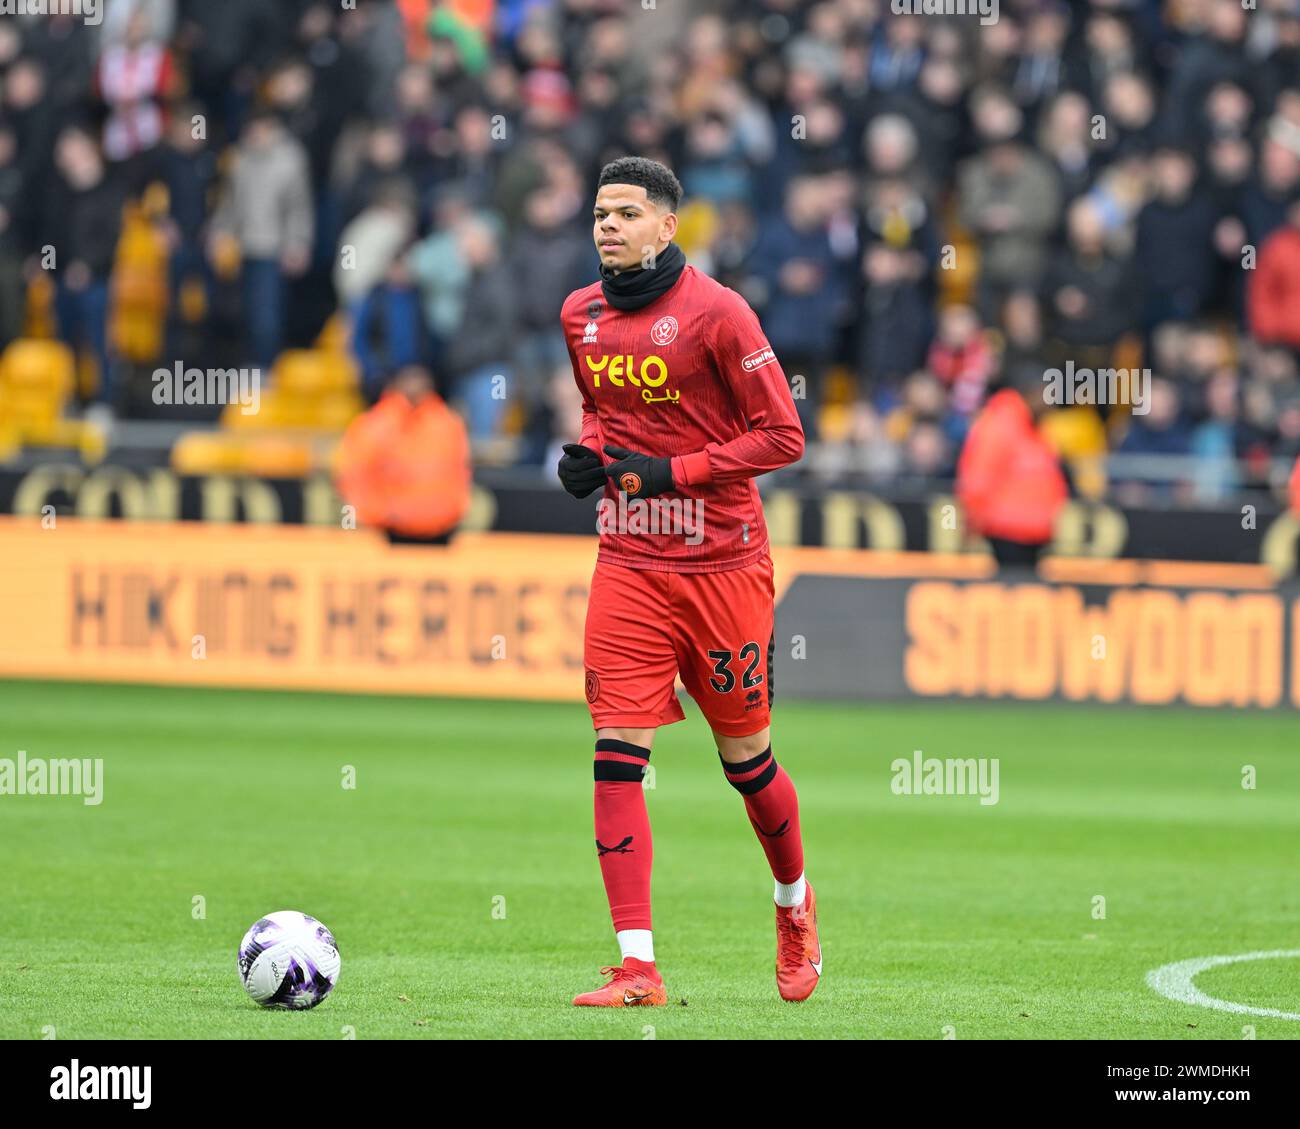 William Osula of Sheffield United warms up ahead of the match, during the Premier League match Wolverhampton Wanderers vs Sheffield United at Molineux, Wolverhampton, United Kingdom, 25th February 2024  (Photo by Cody Froggatt/News Images) Stock Photo